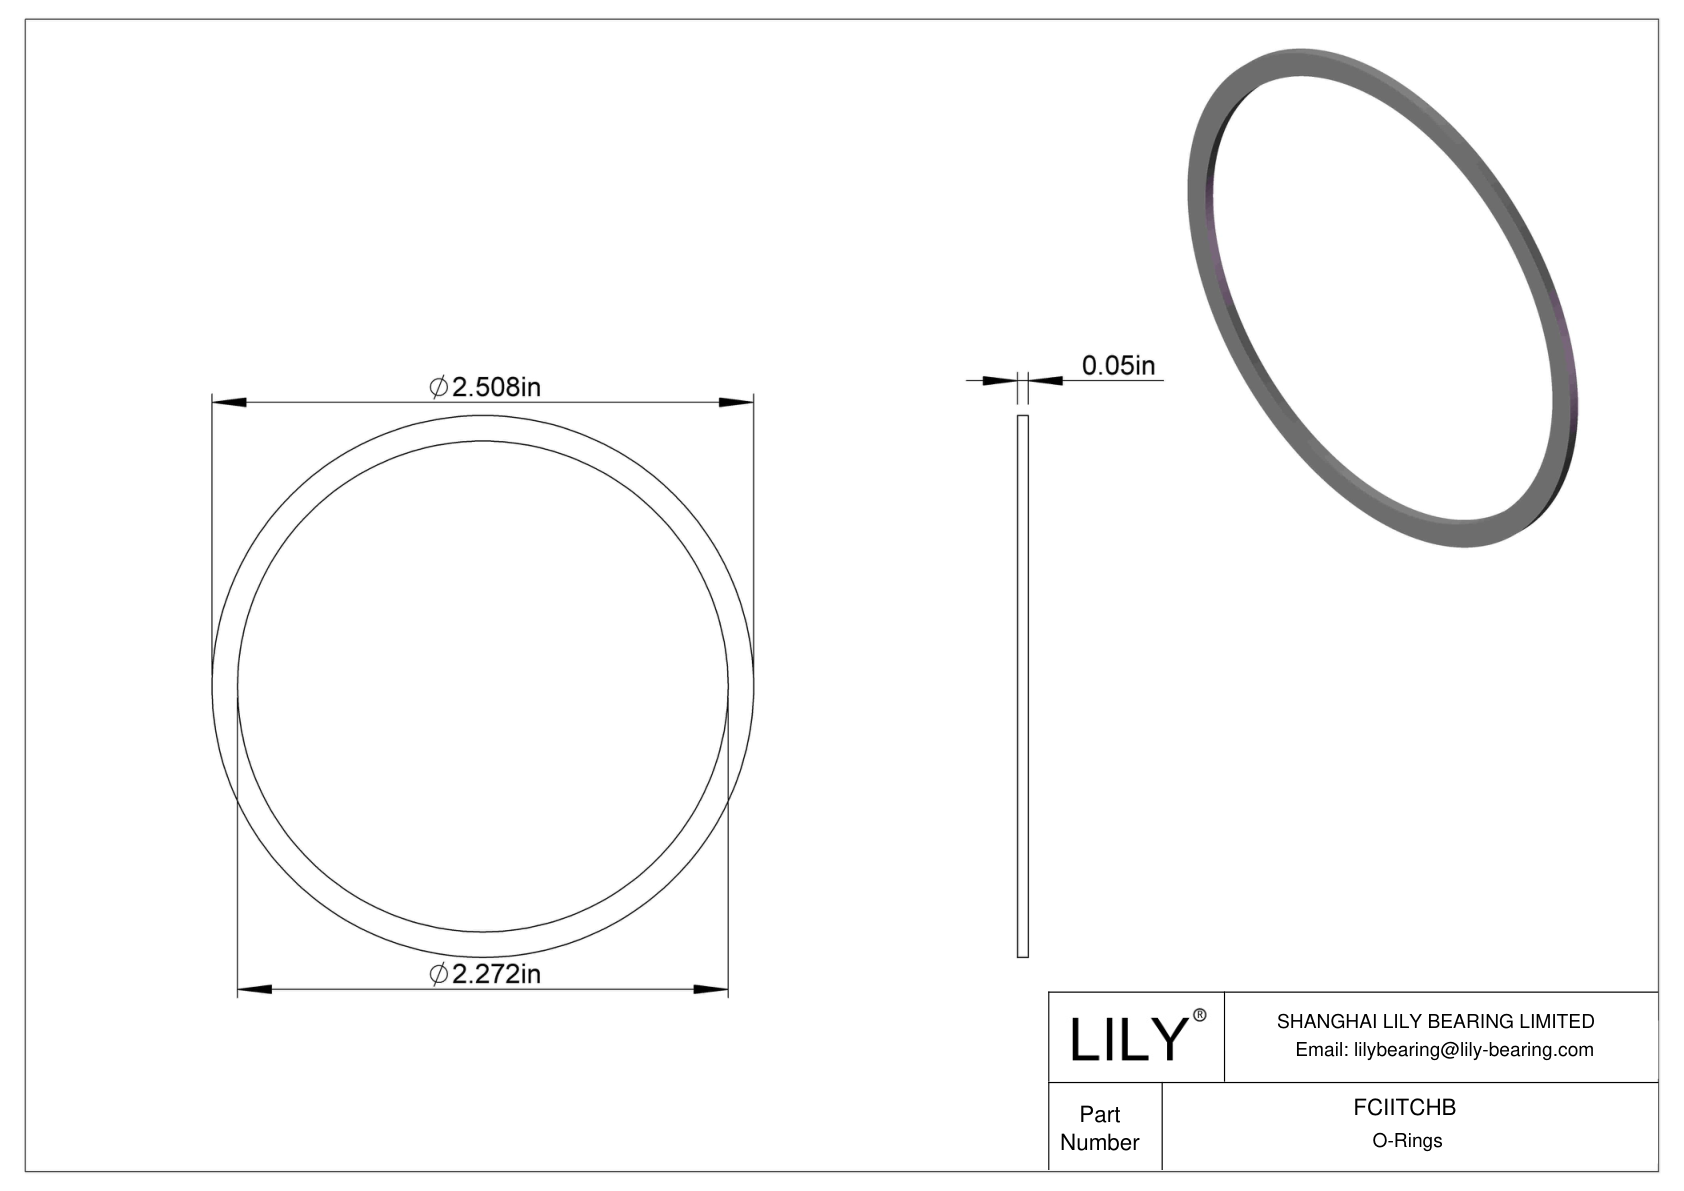 FCIITCHB O-Ring Backup Rings cad drawing